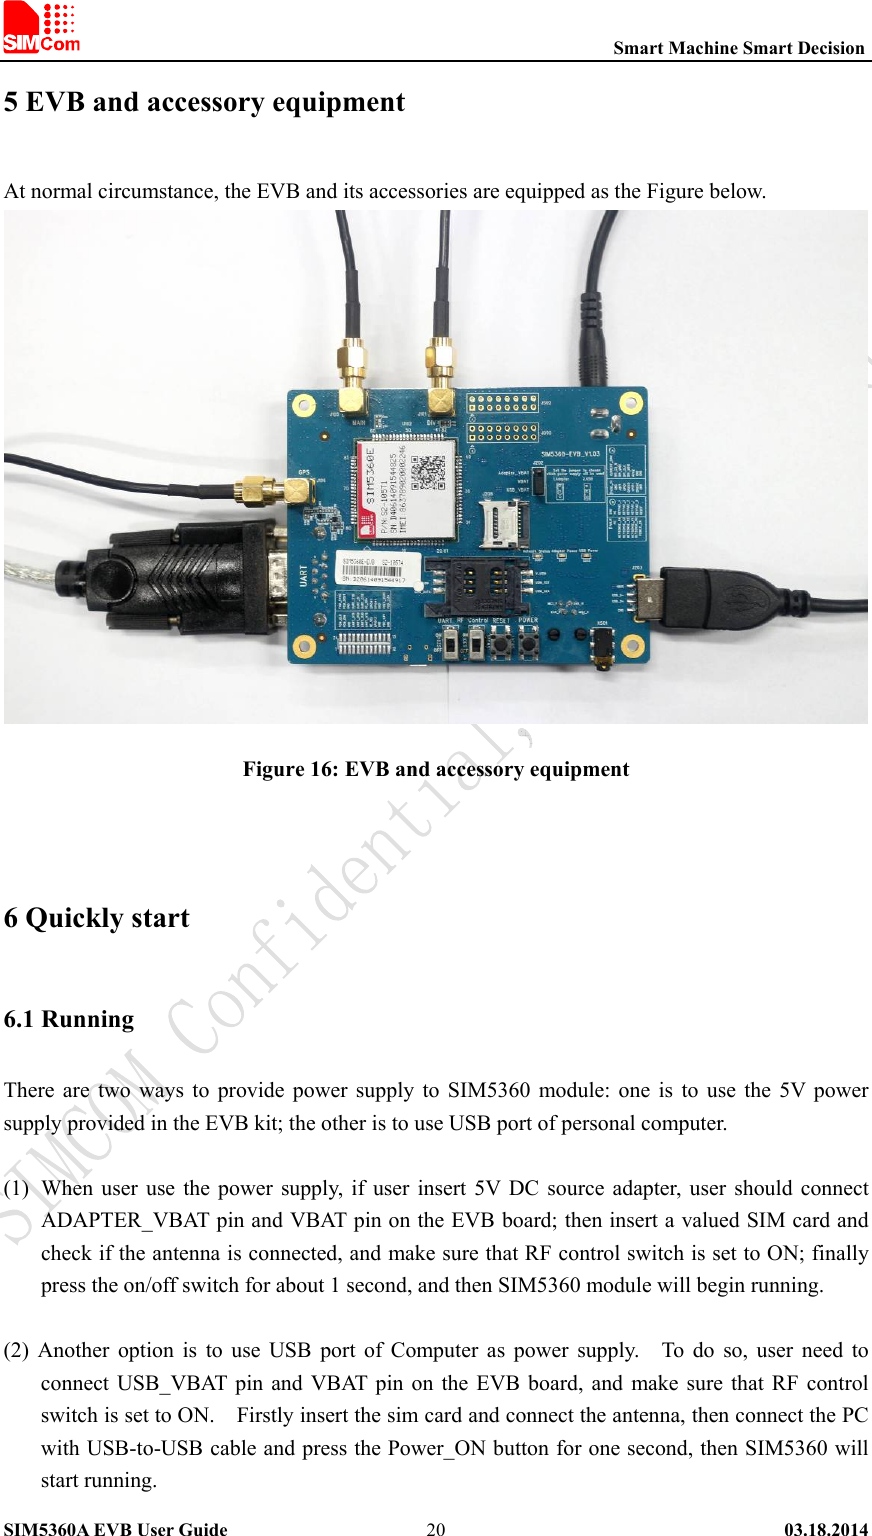                                                          Smart Machine Smart Decision SIM5360A EVB User Guide   03.18.2014   205 EVB and accessory equipment At normal circumstance, the EVB and its accessories are equipped as the Figure below.  Figure 16: EVB and accessory equipment  6 Quickly start 6.1 Running There  are  two  ways to  provide power  supply to  SIM5360 module:  one  is  to  use  the  5V  power supply provided in the EVB kit; the other is to use USB port of personal computer.  (1) When user  use the  power  supply,  if  user insert  5V  DC  source  adapter,  user  should connect ADAPTER_VBAT pin and VBAT pin on the EVB board; then insert a valued SIM card and check if the antenna is connected, and make sure that RF control switch is set to ON; finally press the on/off switch for about 1 second, and then SIM5360 module will begin running.  (2)  Another  option  is  to  use  USB  port  of  Computer  as  power  supply.    To  do  so,  user  need  to connect USB_VBAT pin  and  VBAT pin  on  the EVB board, and  make  sure that RF control switch is set to ON.    Firstly insert the sim card and connect the antenna, then connect the PC with USB-to-USB cable and press the Power_ON button for one second, then SIM5360 will start running. 